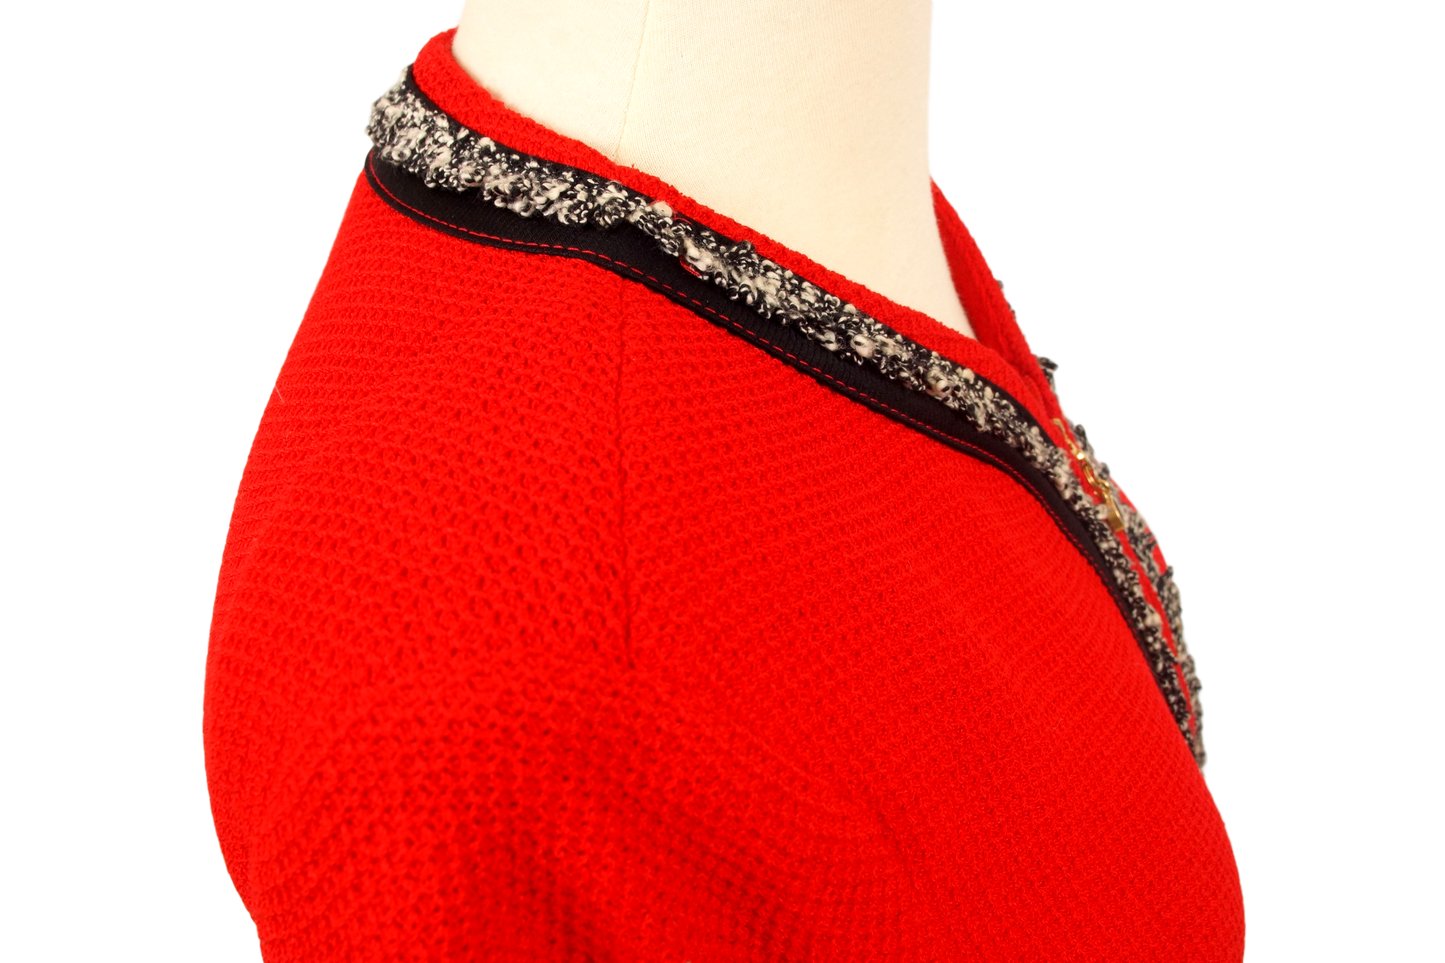 ST. JOHN COLLECTION RED COLLARLESS JACKET - eKlozet Luxury Consignment